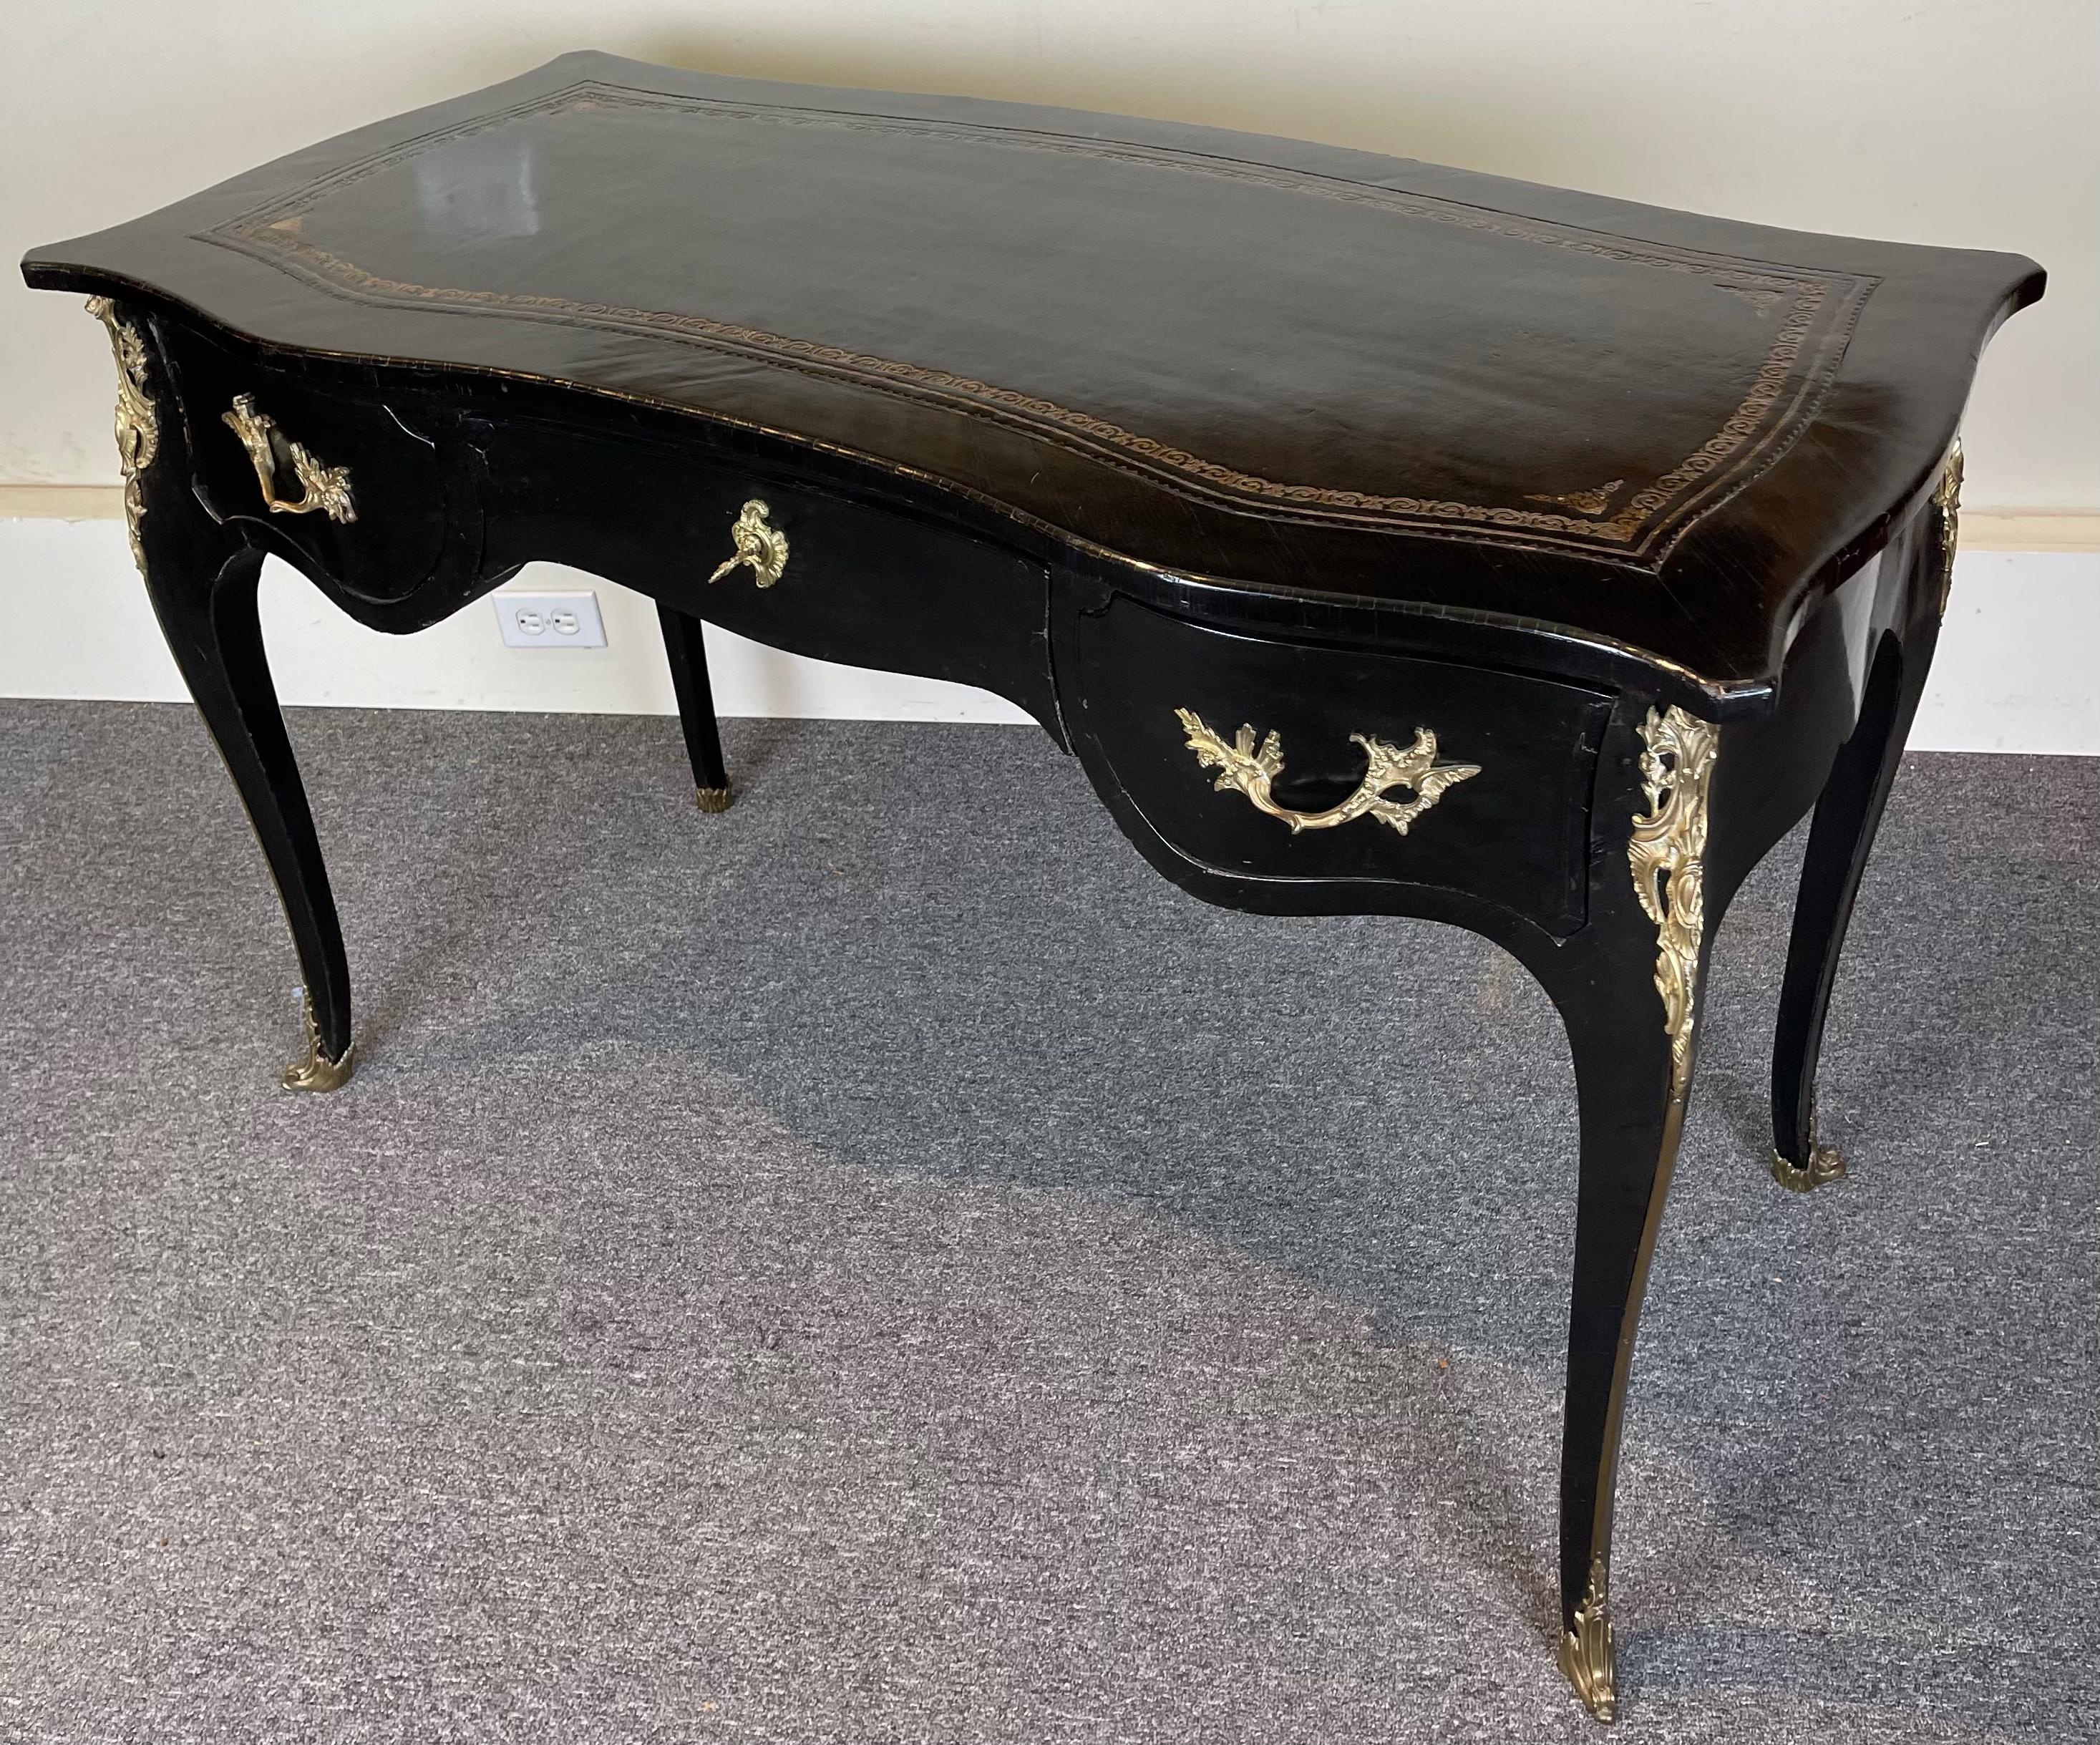 Hand-Crafted Late 18th Century French Black Lacquer Desk